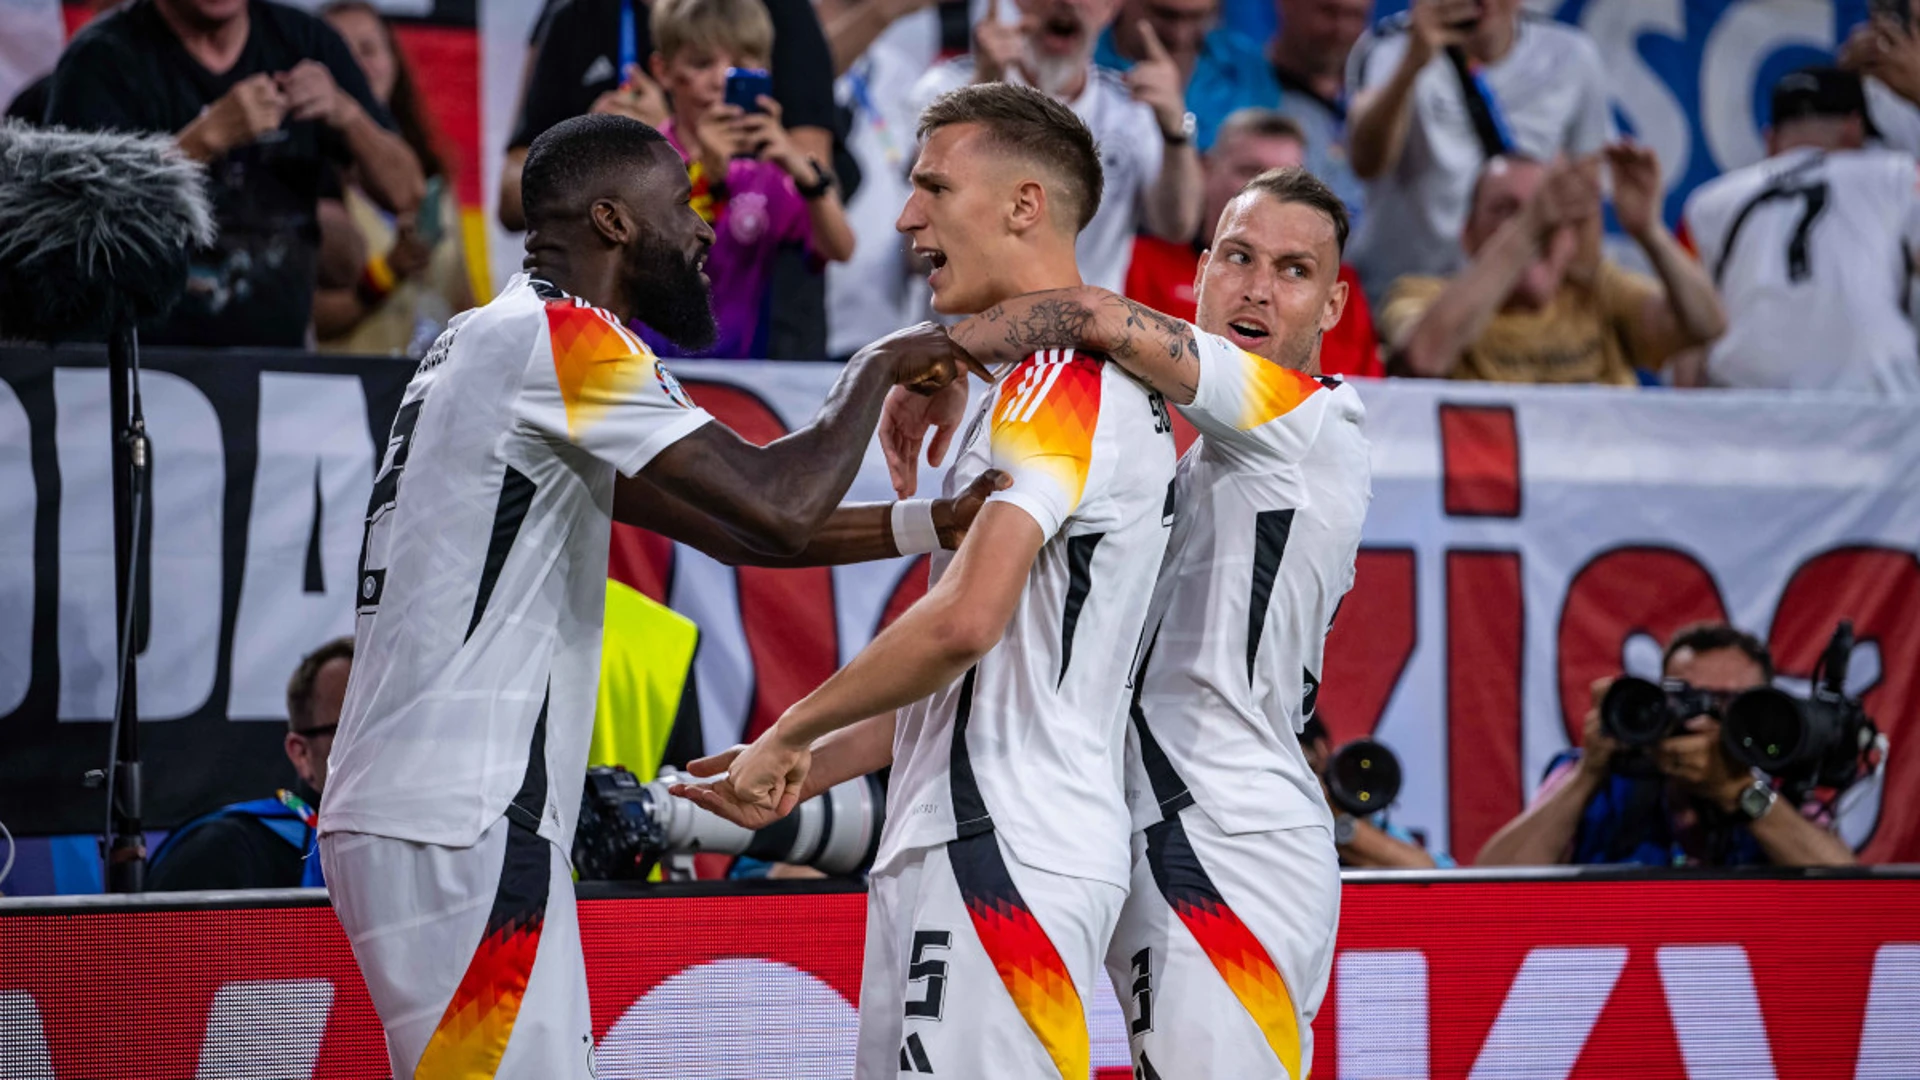 Germany out to snap 36-year winless run against Spain